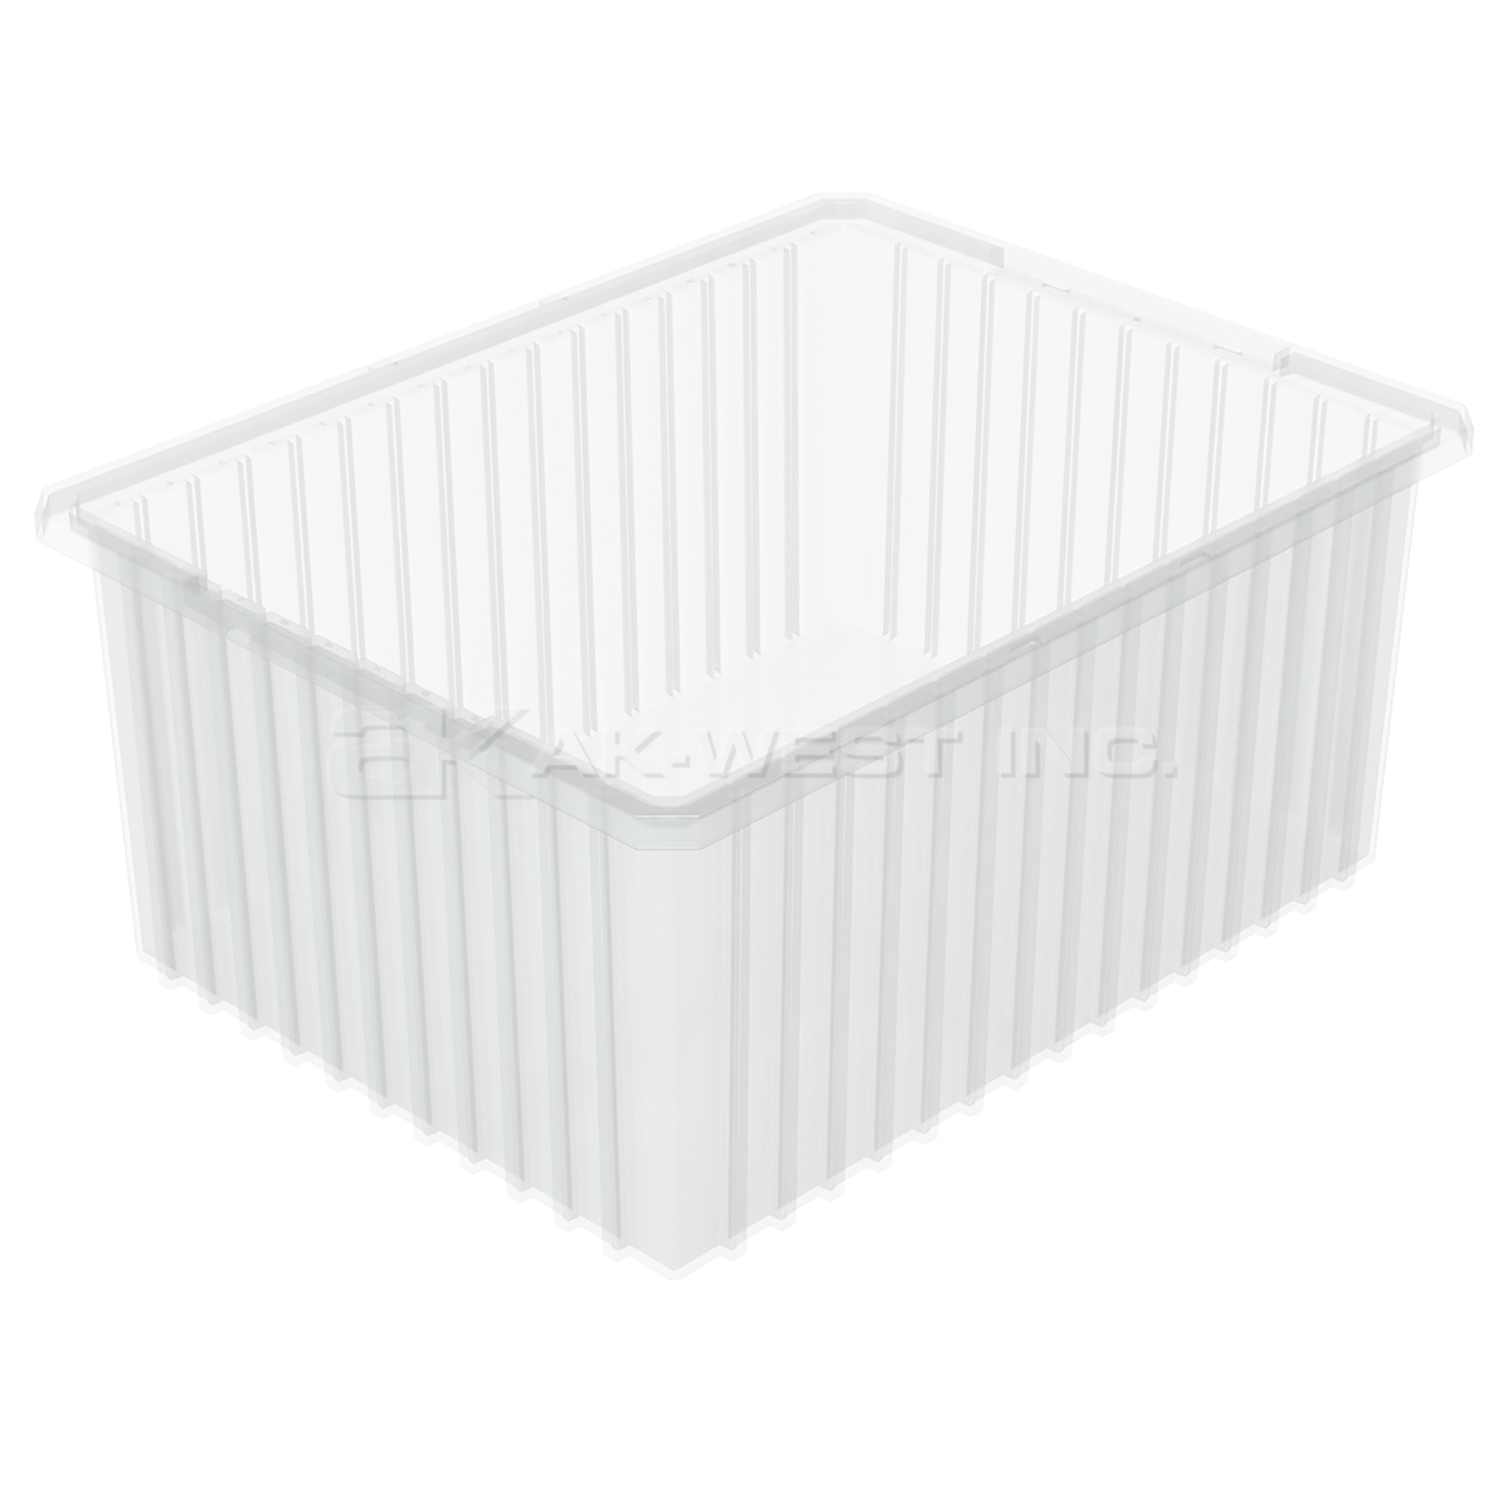 Clear, 22-3/8" x 17-3/8" x 10" Dividable Grid Container (2 Per Carton)